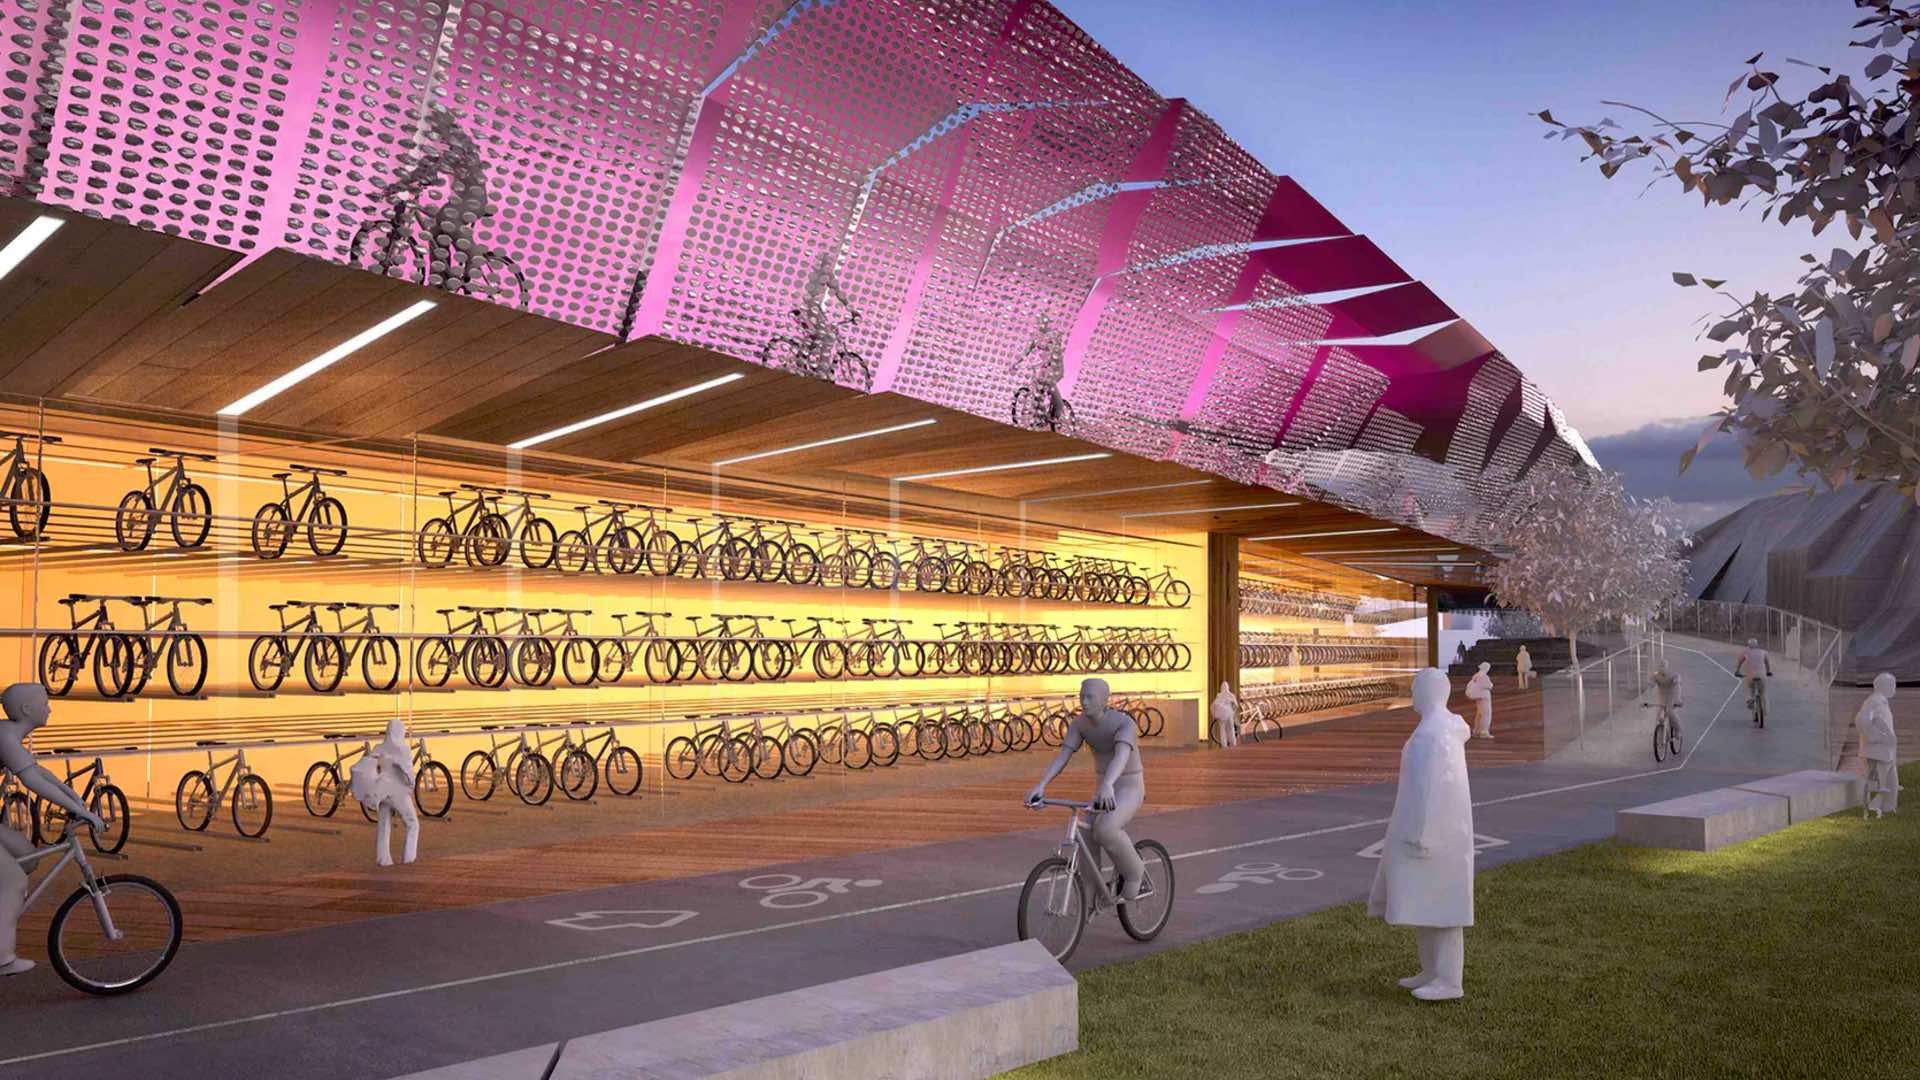 Melbourne Is Getting a 2.5-Kilometre Elevated Bicycle Highway